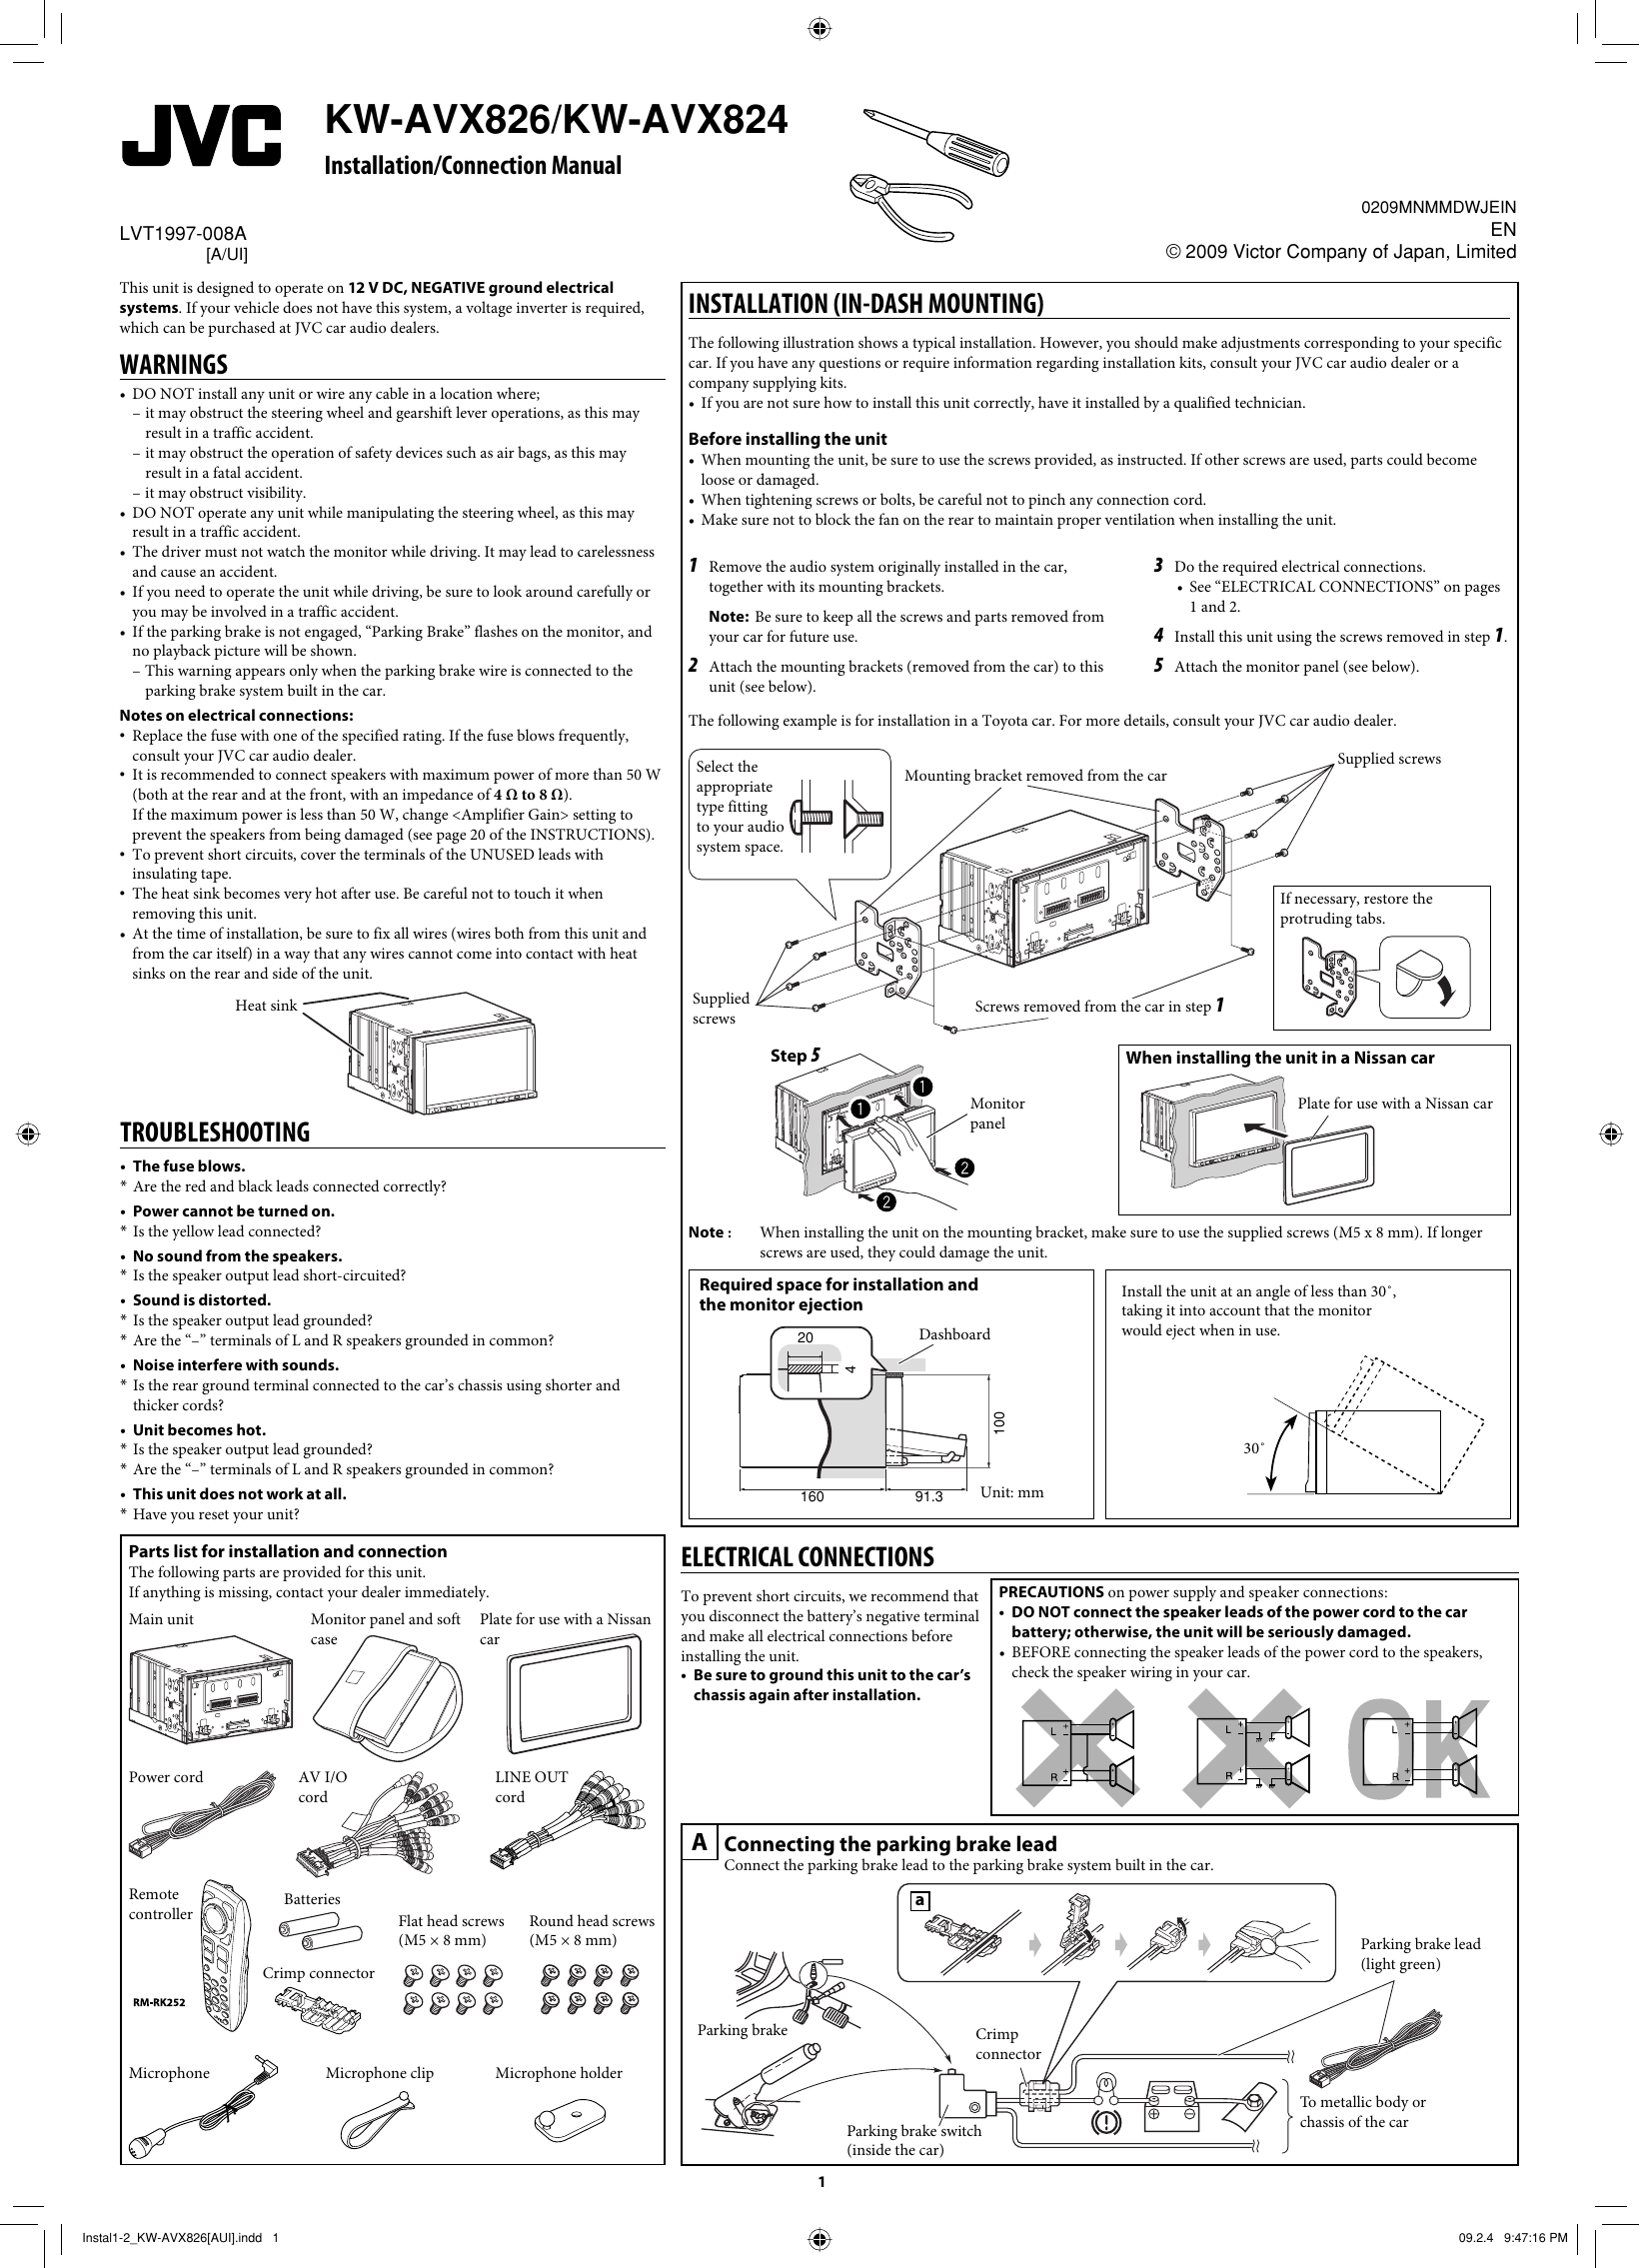 Page 1 of 2 - JVC KW-AVX824UI KW-AVX826/824[A/UI] Install User Manual LVT1997-008A